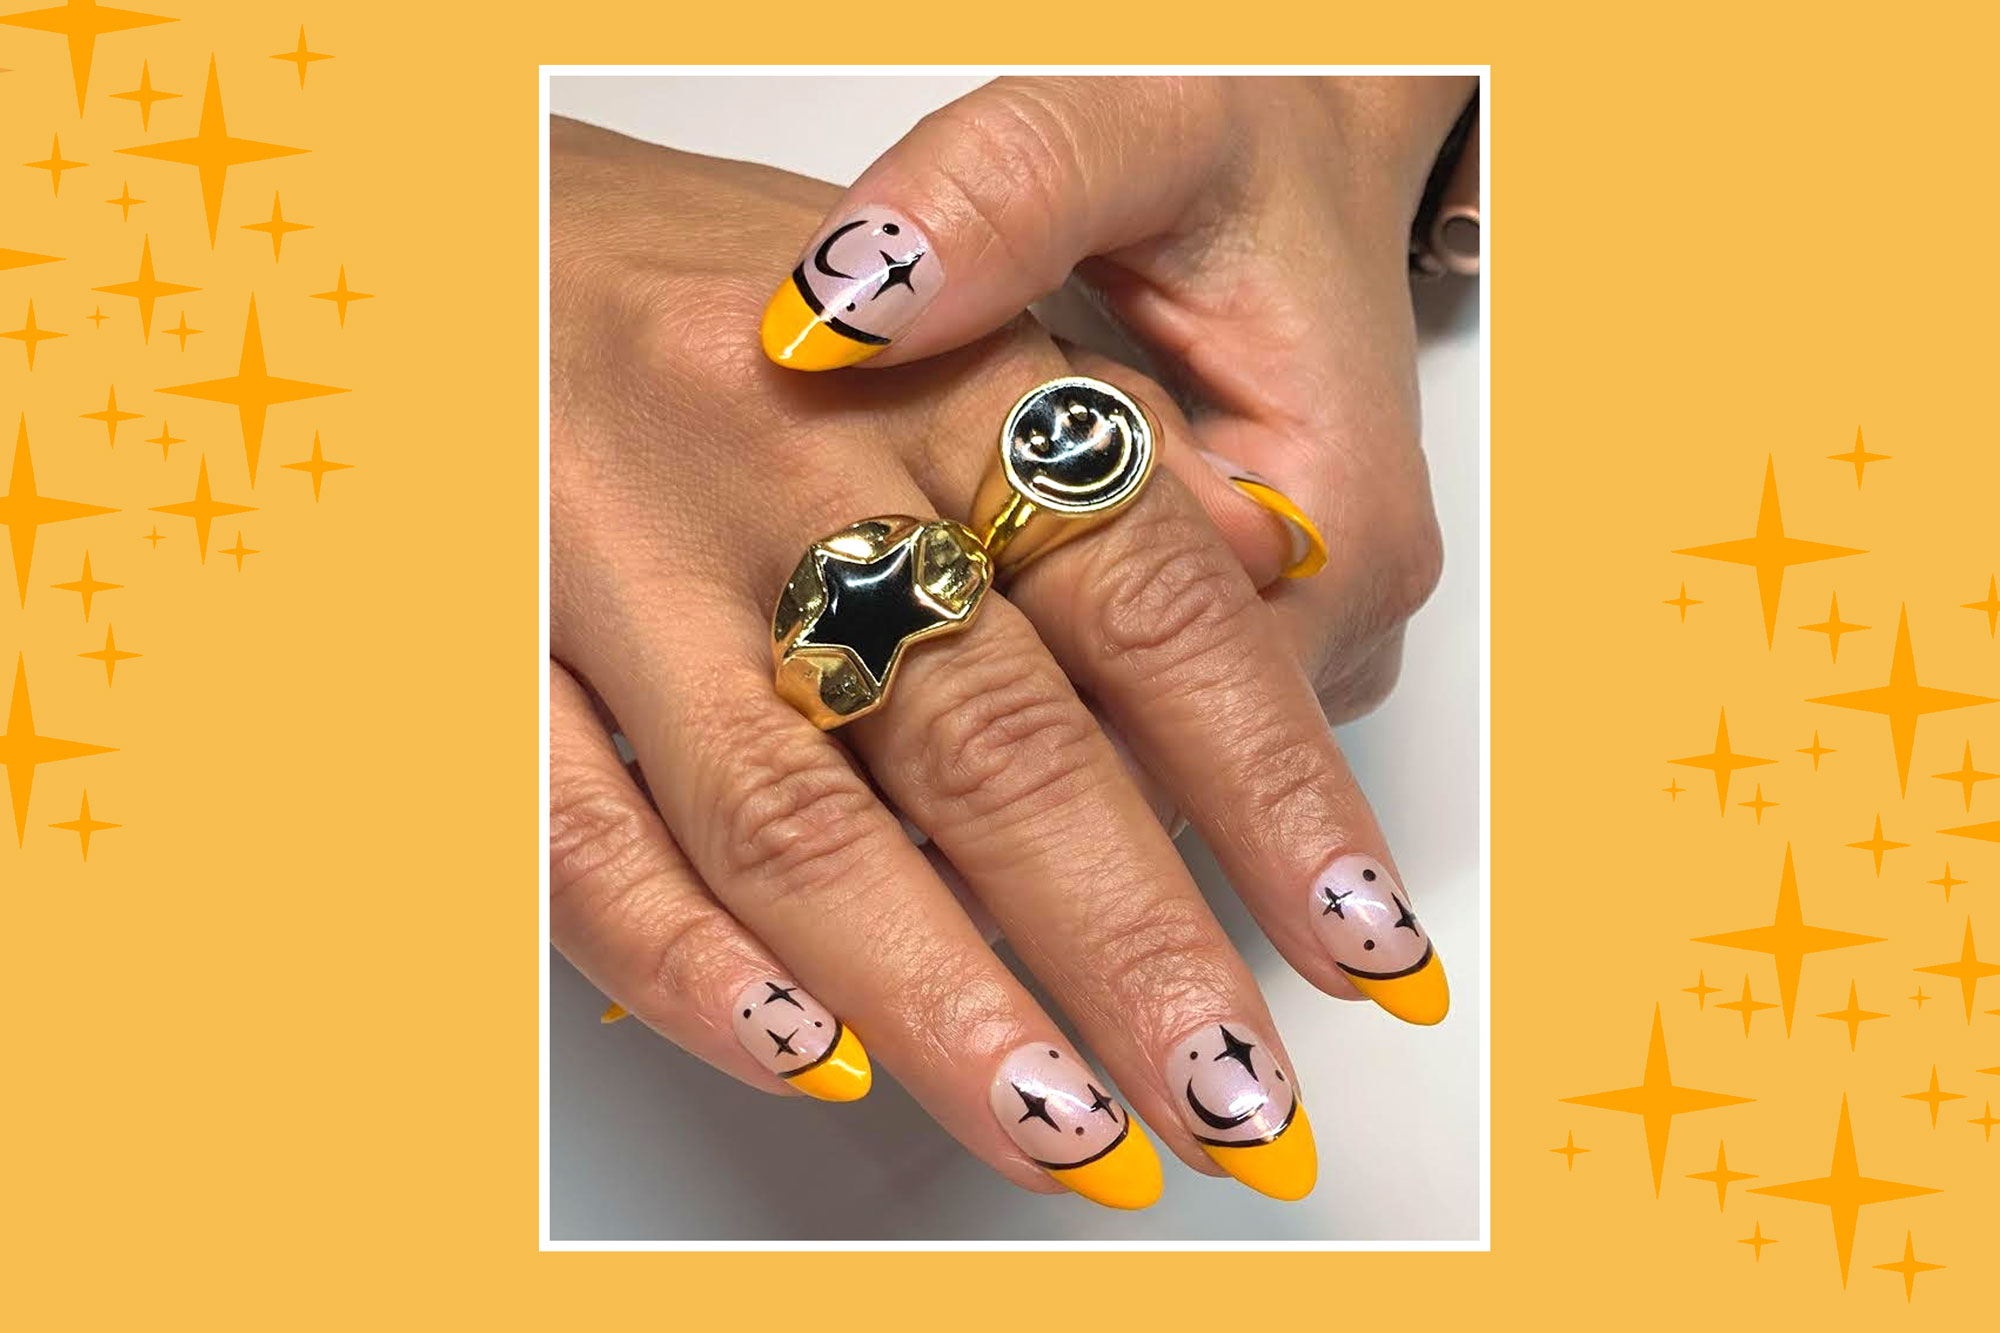 woman's nails with moon and star pattern painted on